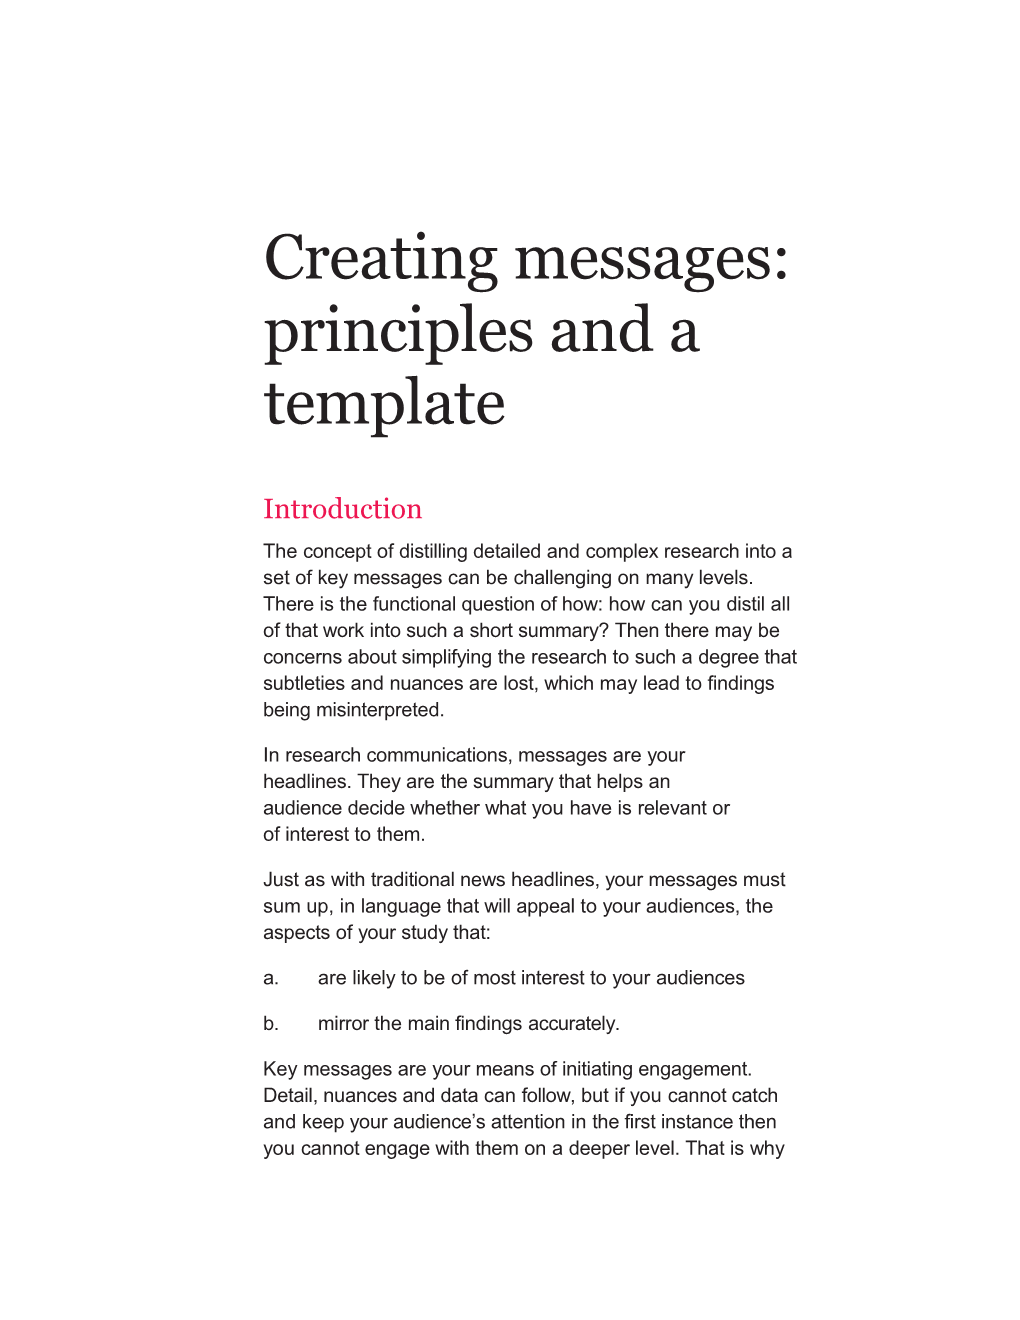 Creating Messages: Principles and a Template